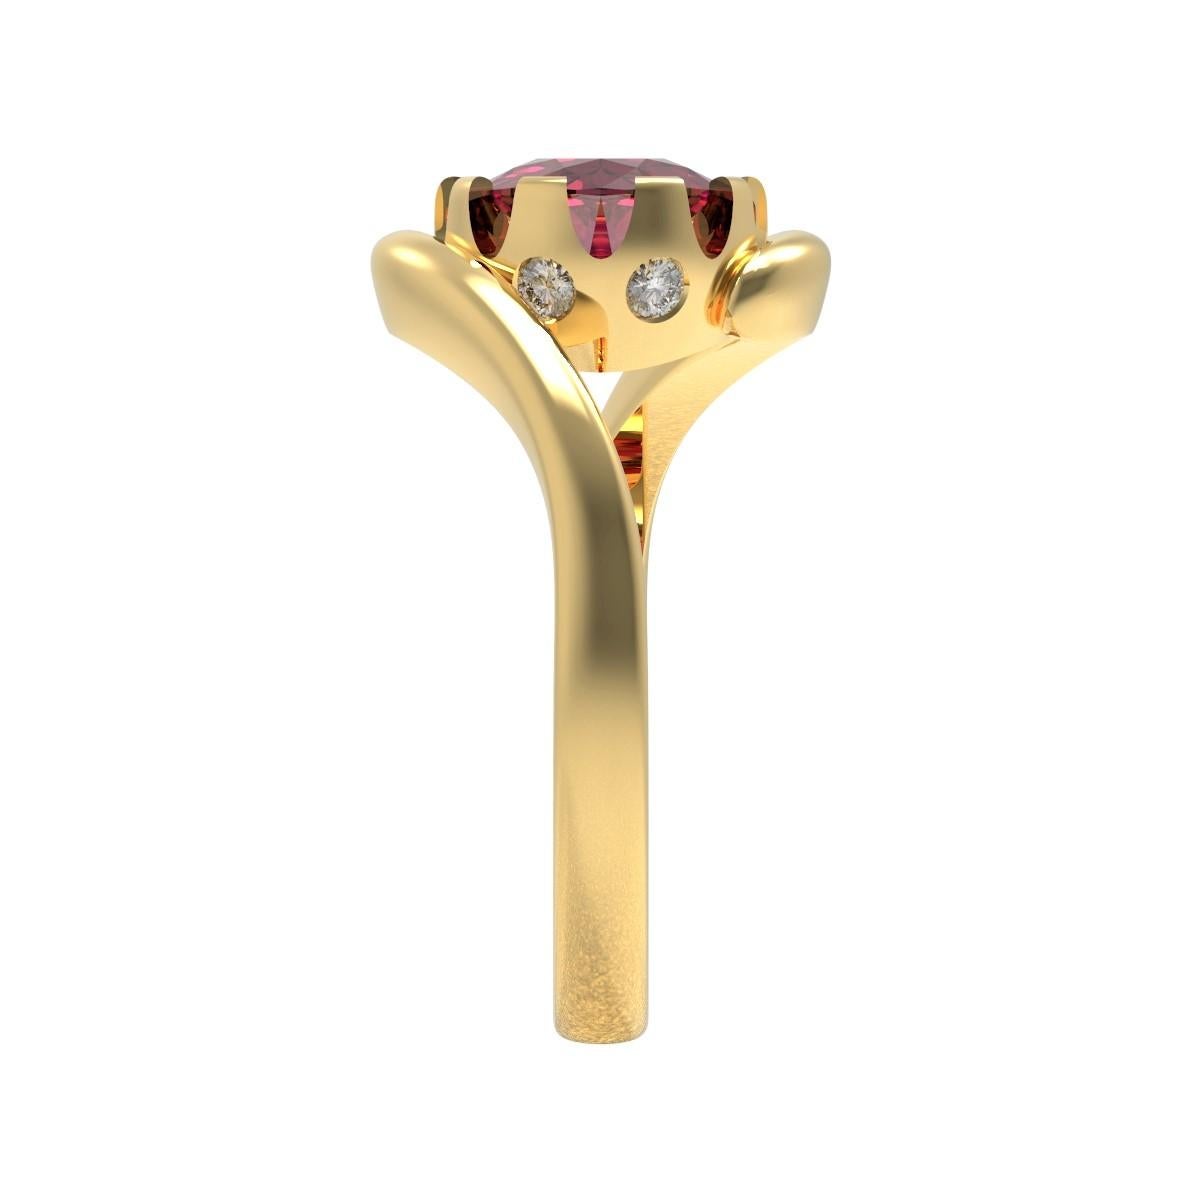  2.05 Carat Rhodolite Garnet &  Diamonds Cocktail Ring  In 18 Carat Yellow Gold In New Condition For Sale In South Perth, AU